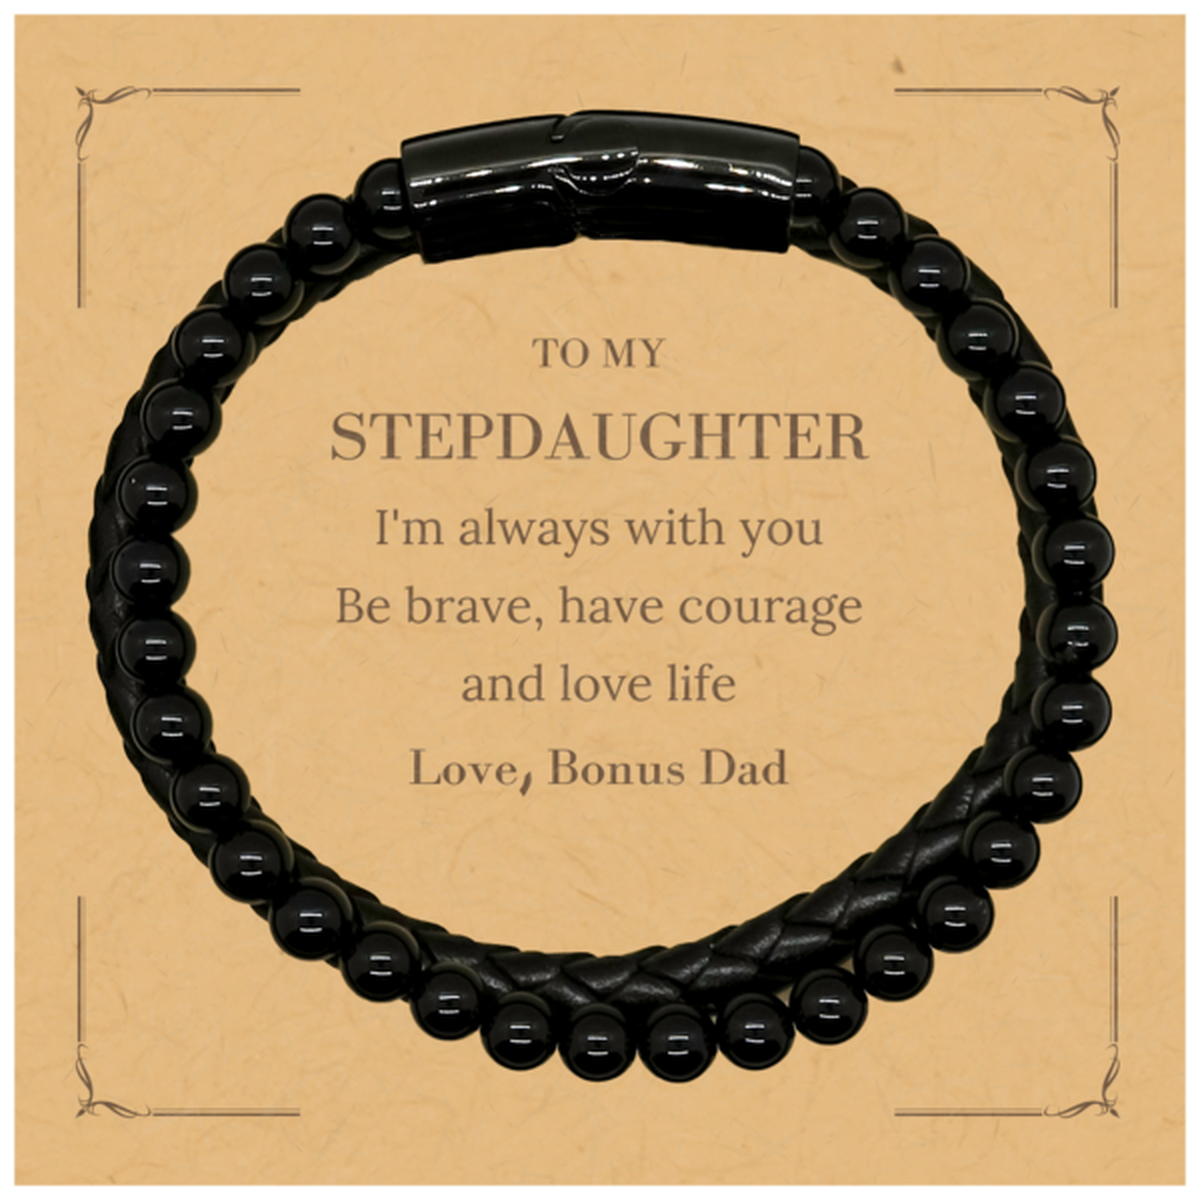 To My Stepdaughter Gifts from Bonus Dad, Unique Stone Leather Bracelets Inspirational Christmas Birthday Graduation Gifts for Stepdaughter I'm always with you. Be brave, have courage and love life. Love, Bonus Dad